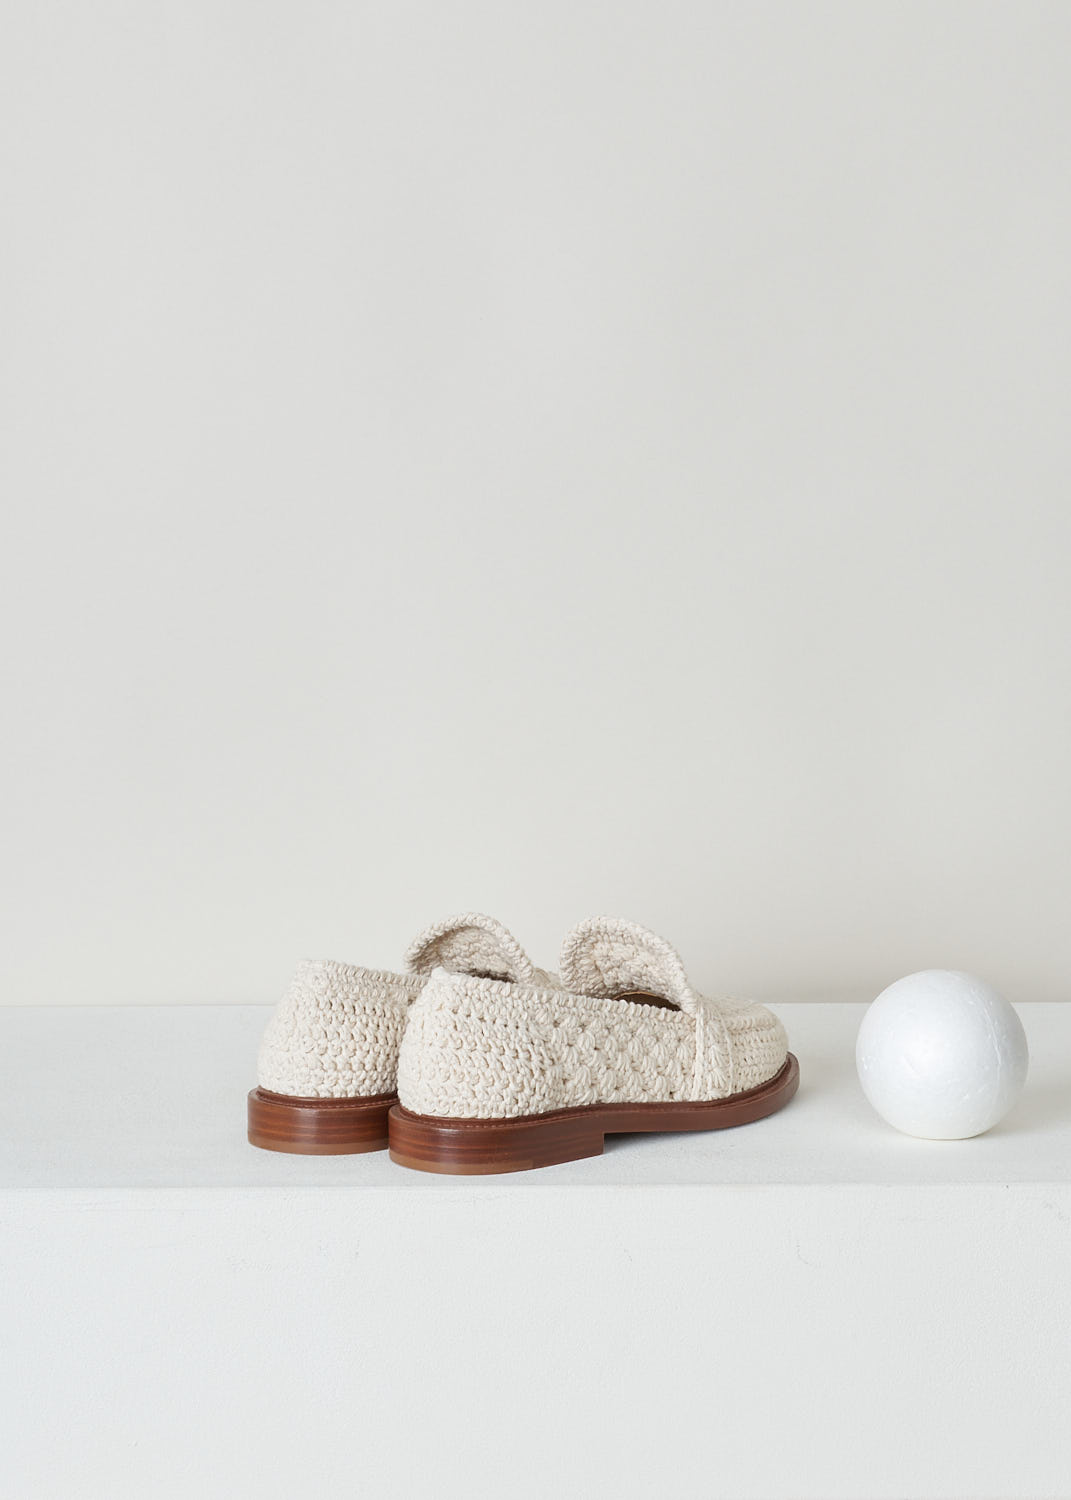 CHLOÃ‰, BEIGE CROCHET LOAFERS, 
CHC22S584X0122_KALYA_FLAT_LOAFERS_122_EGGSHELL, Beige, Back, These beige crochet loafers have a slip-on style with a round toe. The shoes have a sleek brown sole.
